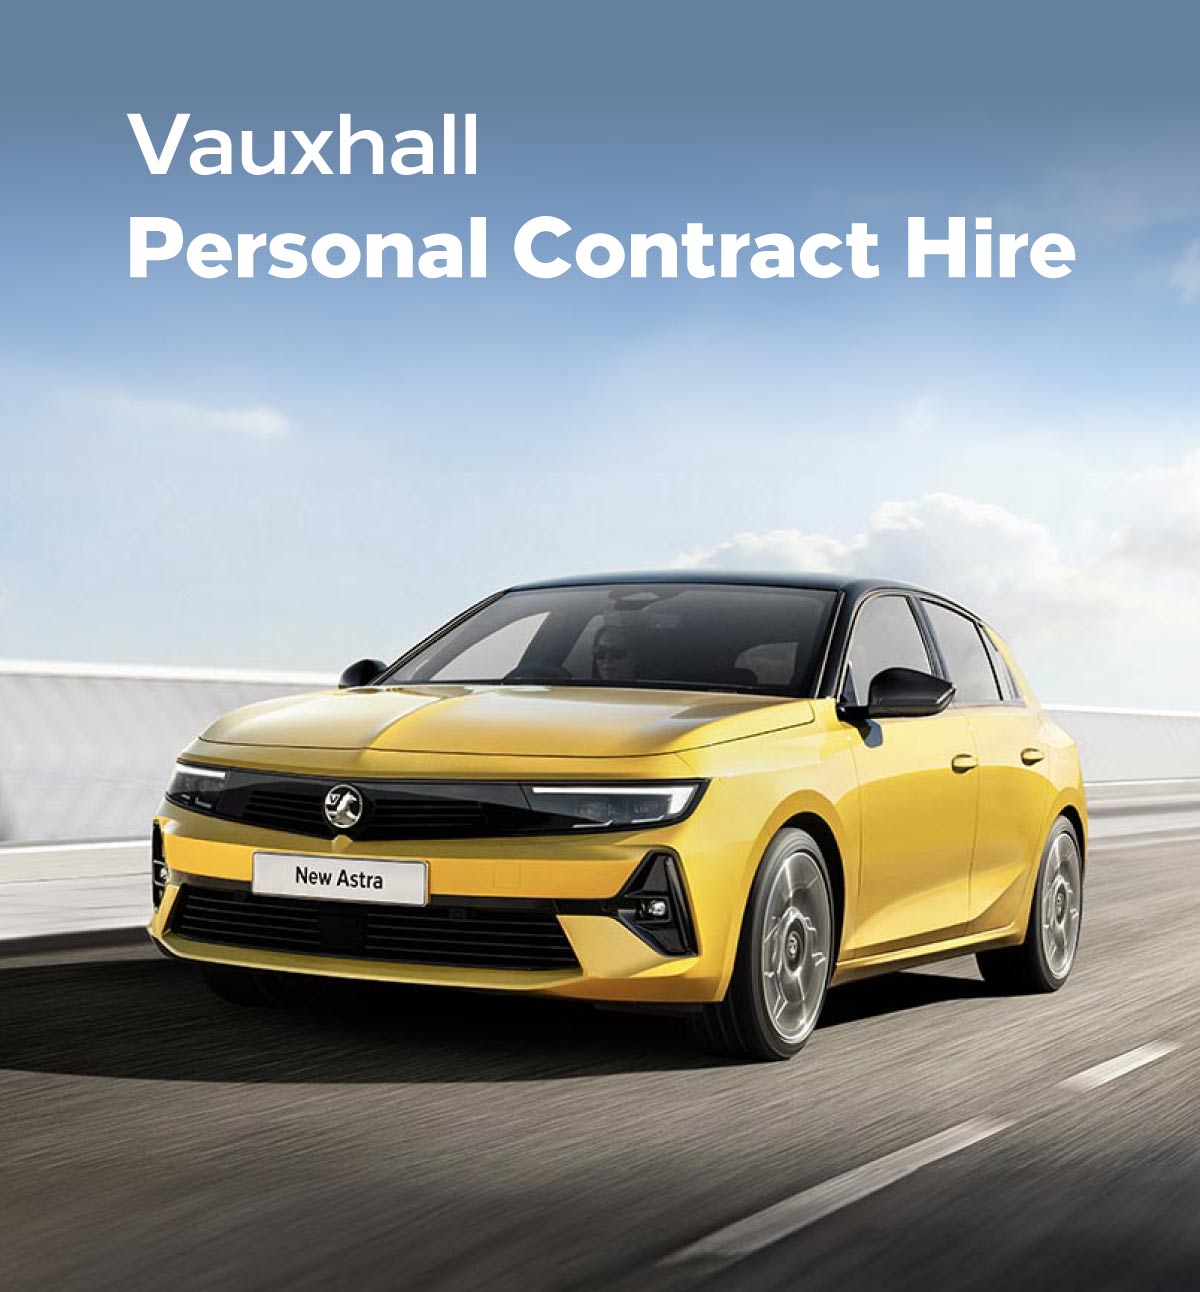 Vauxhall Personal Contract Hire